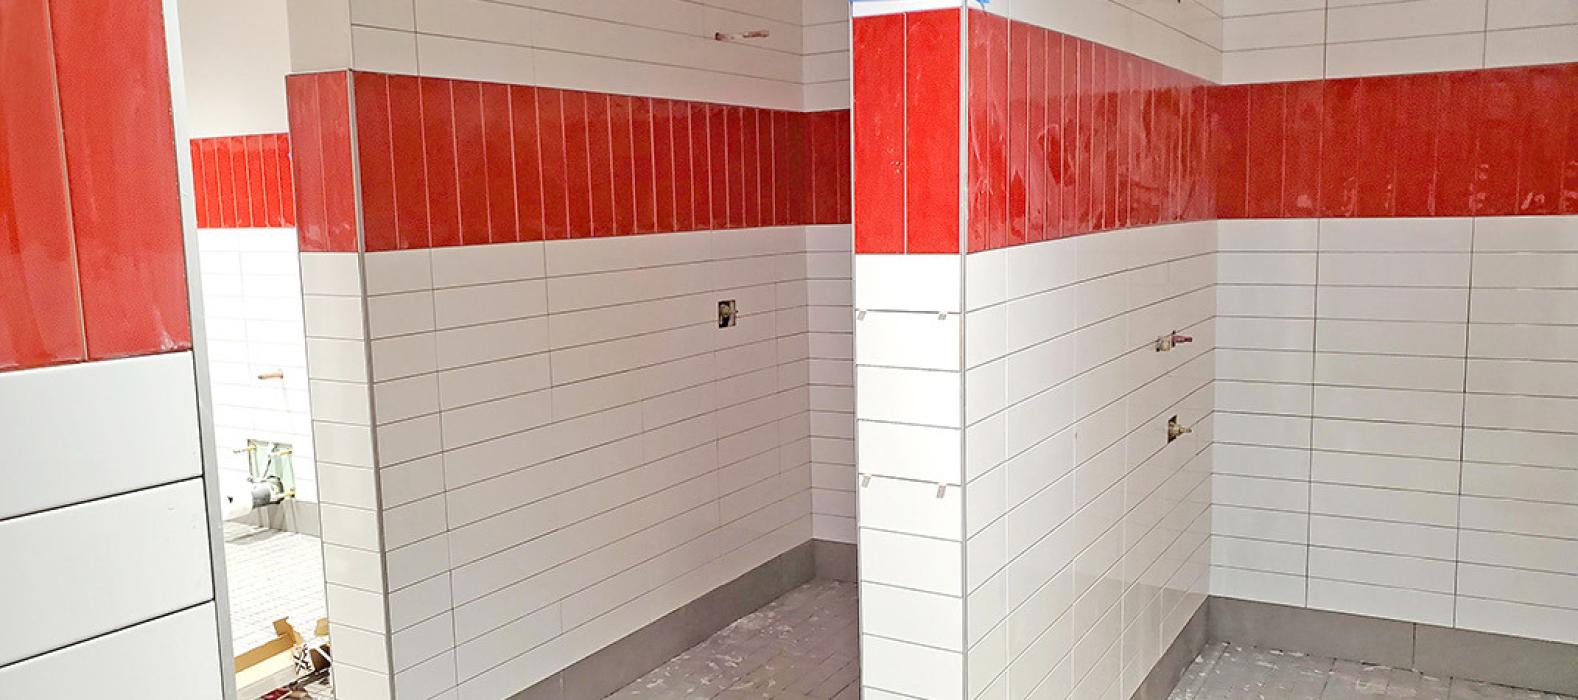 The locker rooms at the new wellness center will have private shower stalls tiled in the school colors.